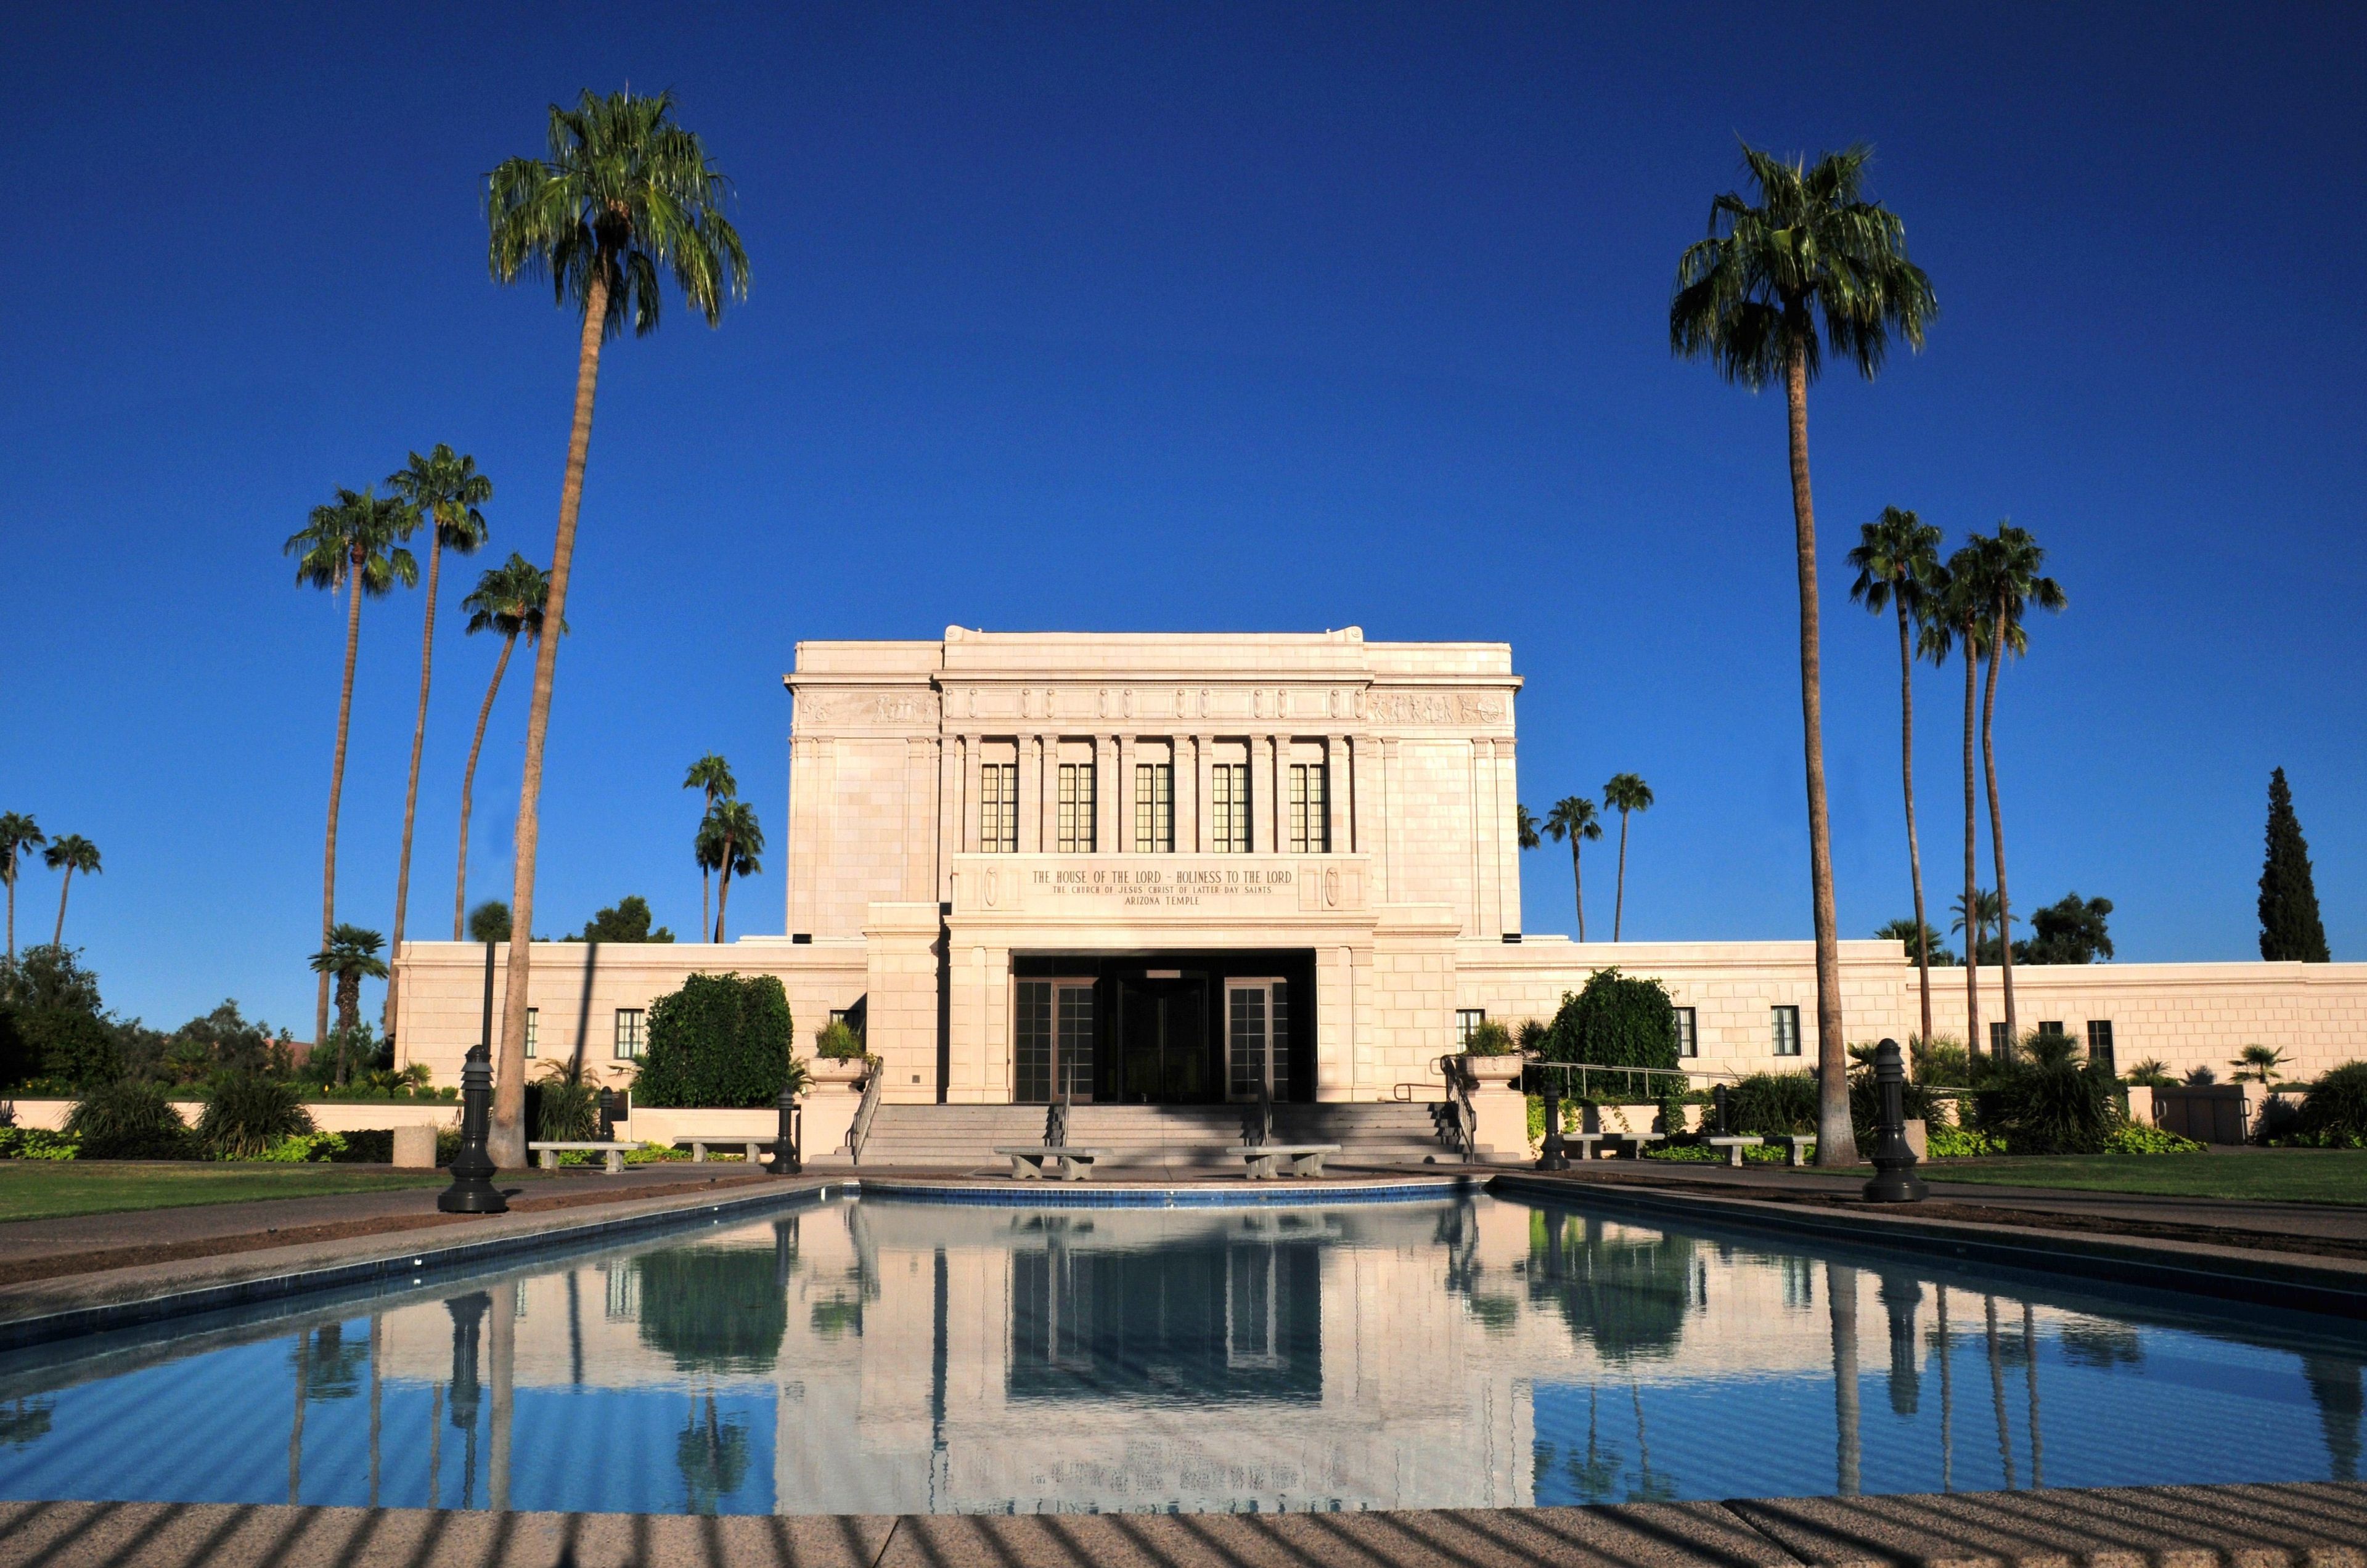 The Mesa Arizona Temple entrance, including the reflection pond and scenery.